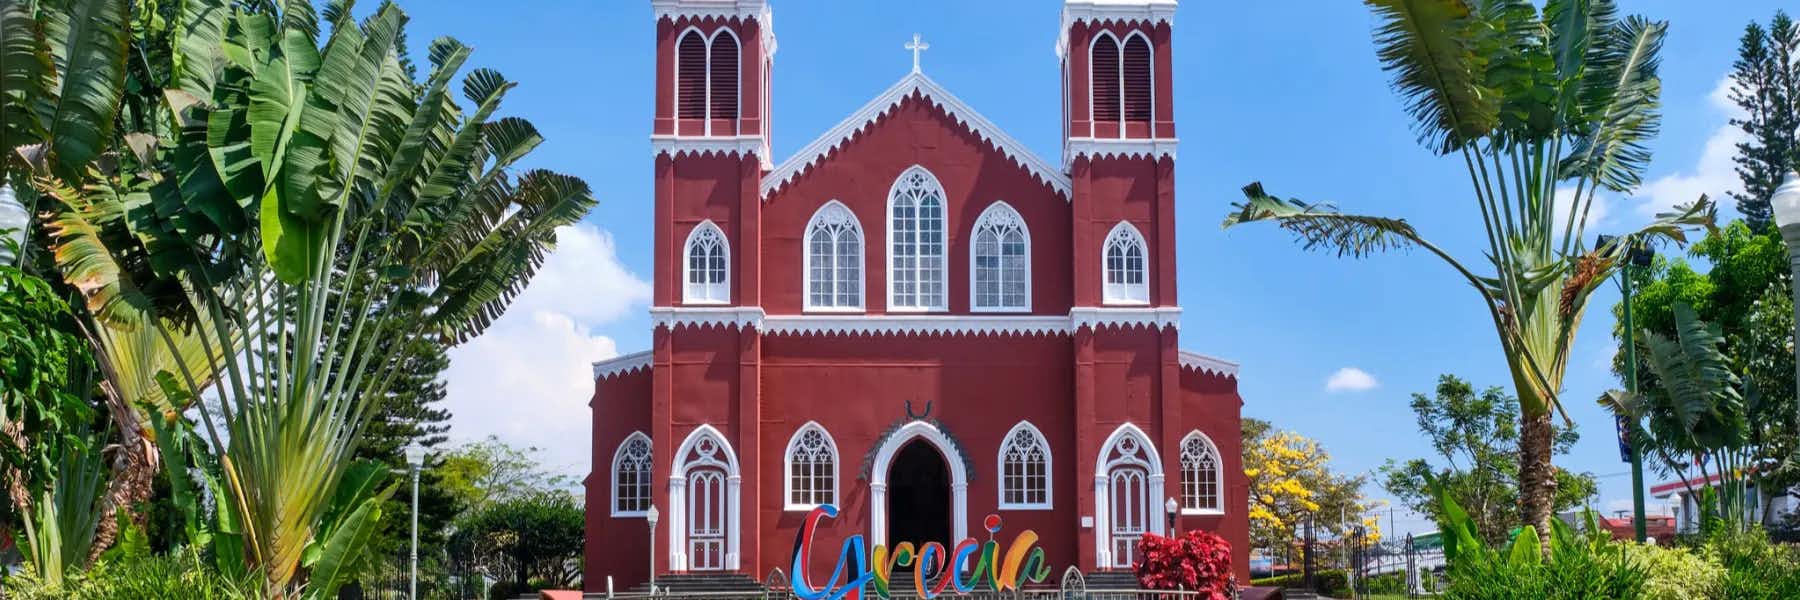 Grecia, Costa Rica - Guide To A Jewel Of The Central Valley